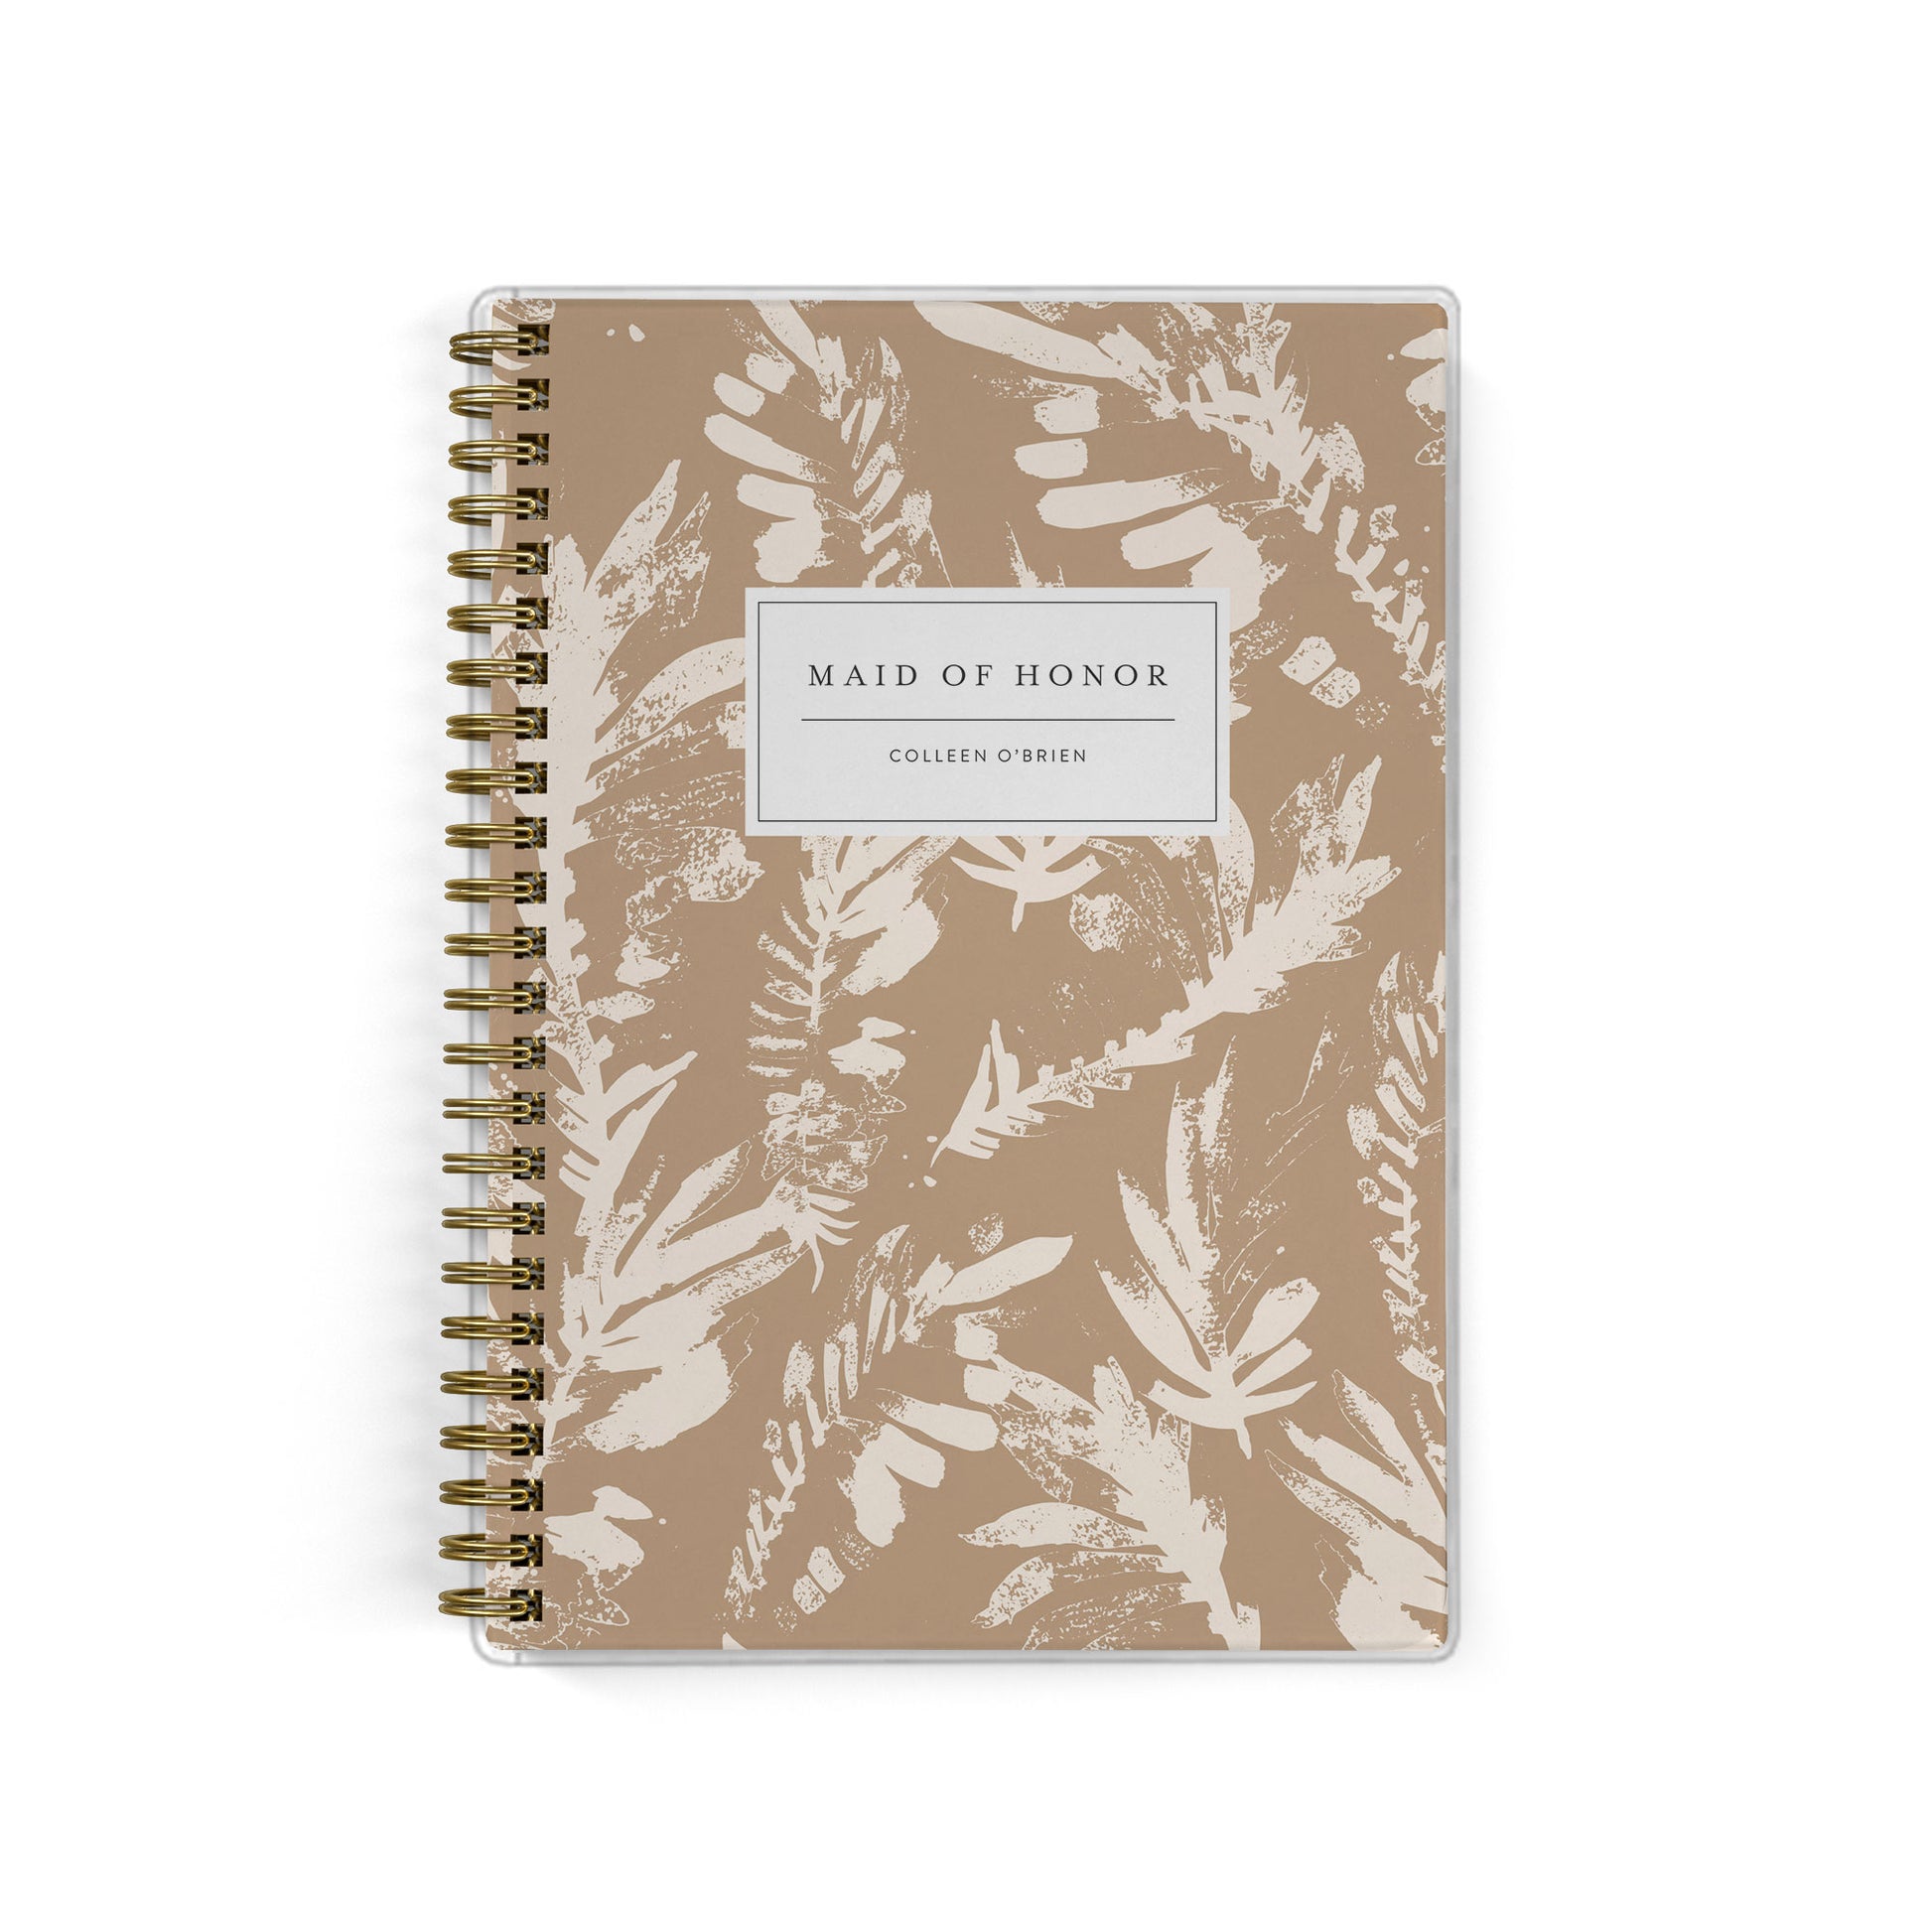 Our exclusive maid of honor planners are the perfect gift for your best friend, shown in a neutral boho leaf print